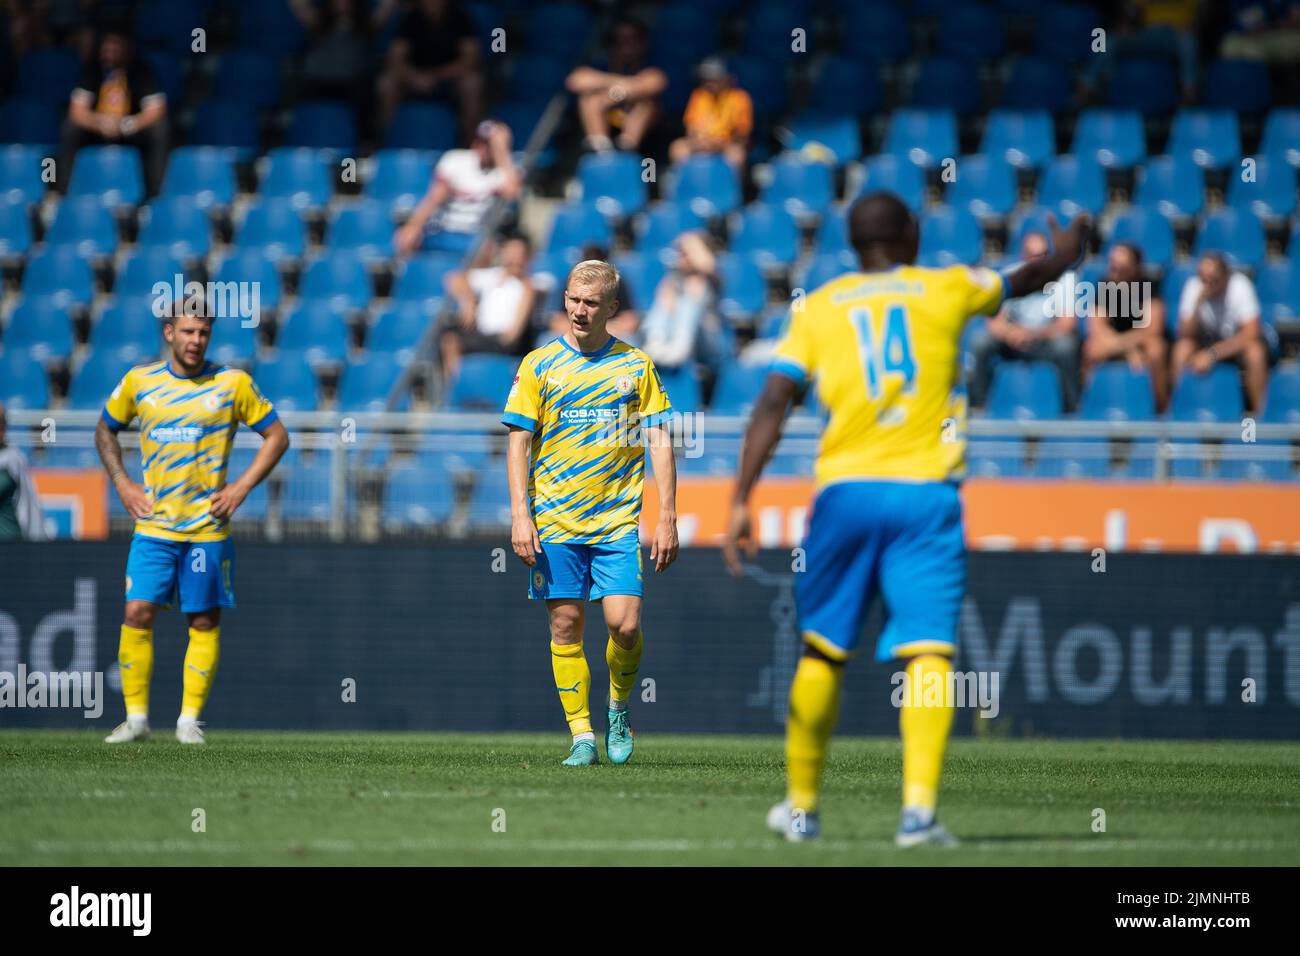 07 August 2022, Lower Saxony, Brunswick: Soccer: 2nd Bundesliga, Eintracht Braunschweig - Darmstadt 98, Matchday 3, Eintracht Stadium. Braunschweig's players stand disappointed on the pitch. Photo: Swen Pförtner/dpa - IMPORTANT NOTE: In accordance with the requirements of the DFL Deutsche Fußball Liga and the DFB Deutscher Fußball-Bund, it is prohibited to use or have used photographs taken in the stadium and/or of the match in the form of sequence pictures and/or video-like photo series. Stock Photo